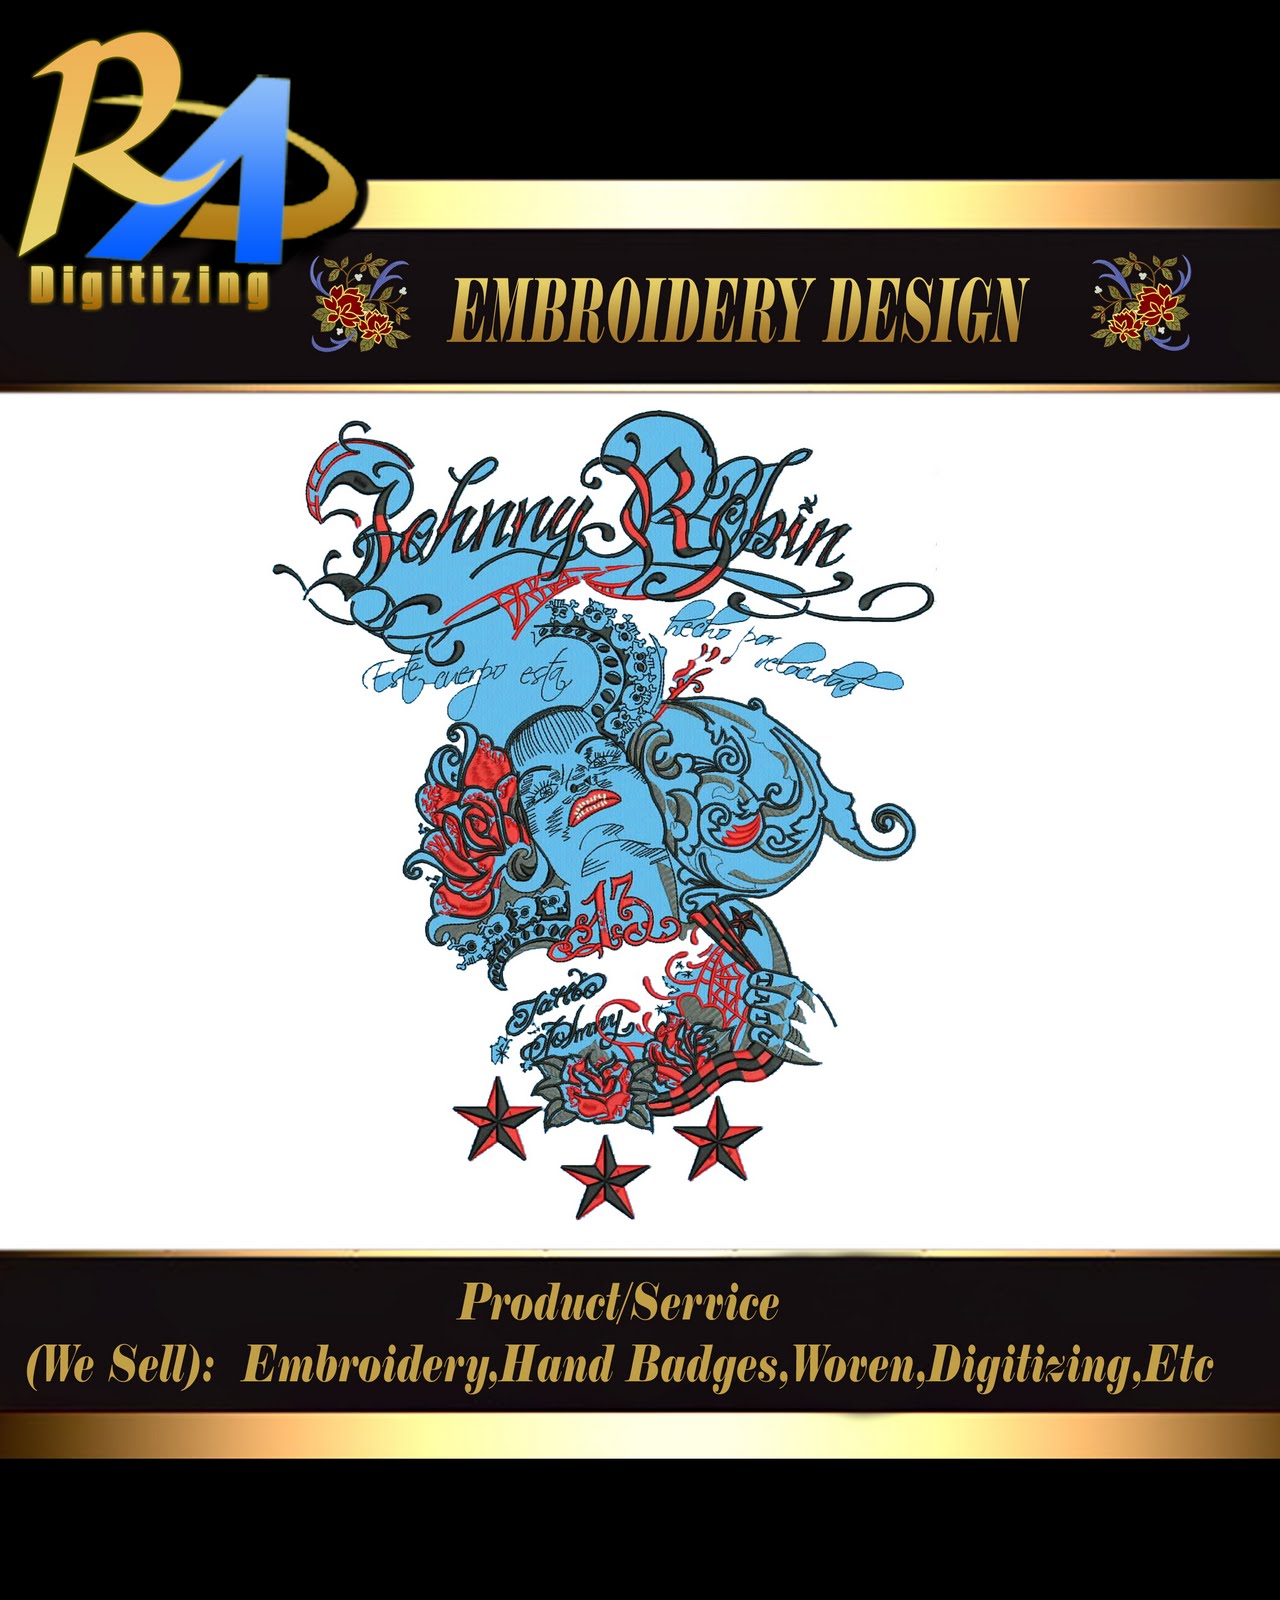 Embroidery Digitizing Embroidery Digitizing RA Digitizing Ind New